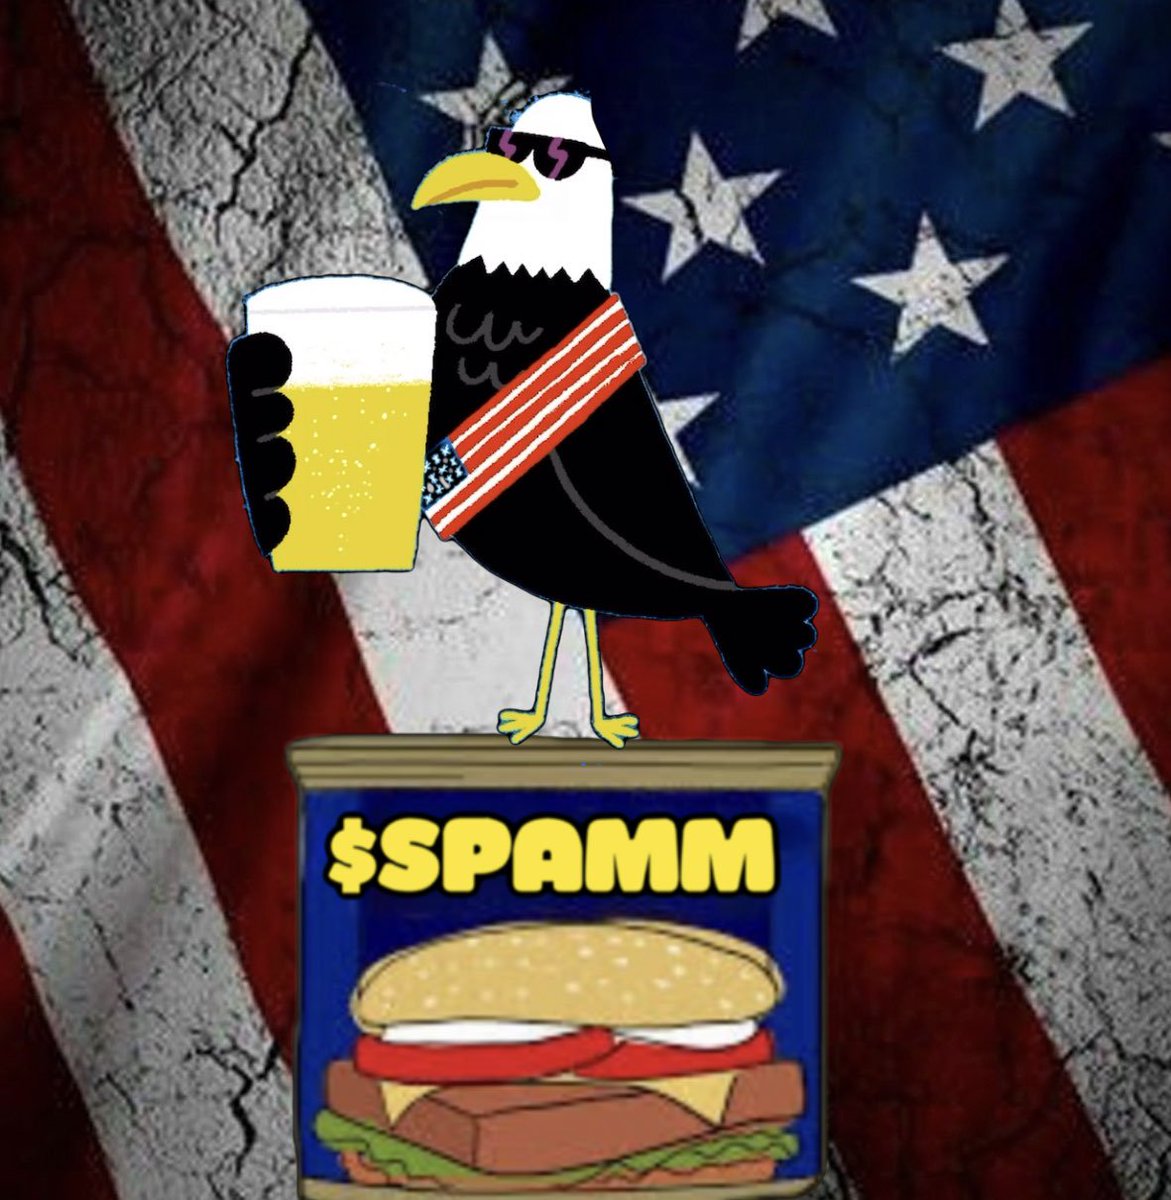 HAPPY FOURTH EVERYONE it is time for $SPAMM

 Is It   #BEER :30  yet ?  

#CardanoCommunity #Cardano #fireworks #sparklers #latinfood #greekfood #AustinTX #grilling